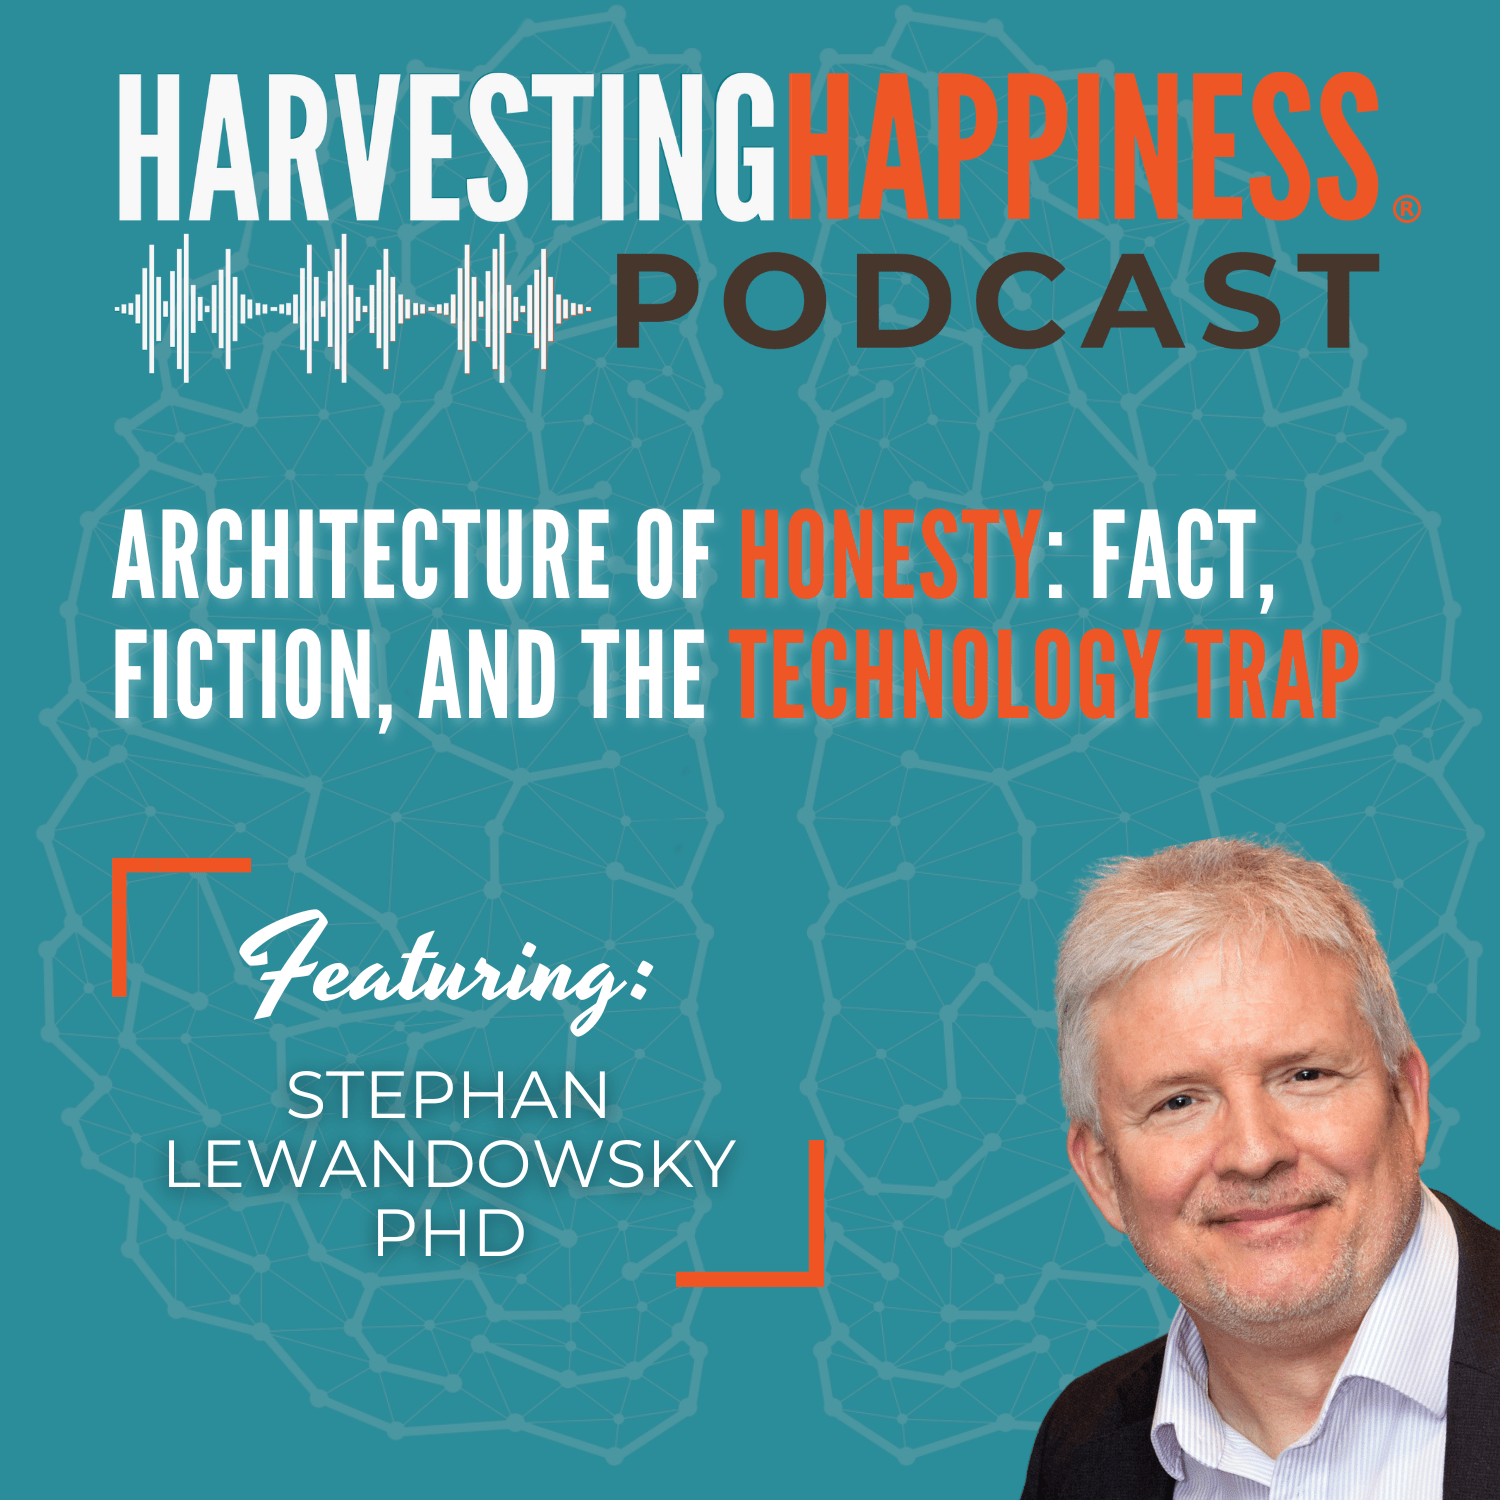 Architecture of Honesty: Fact, Fiction, and the Technology Trap with Stephan Lewandowsky PhD